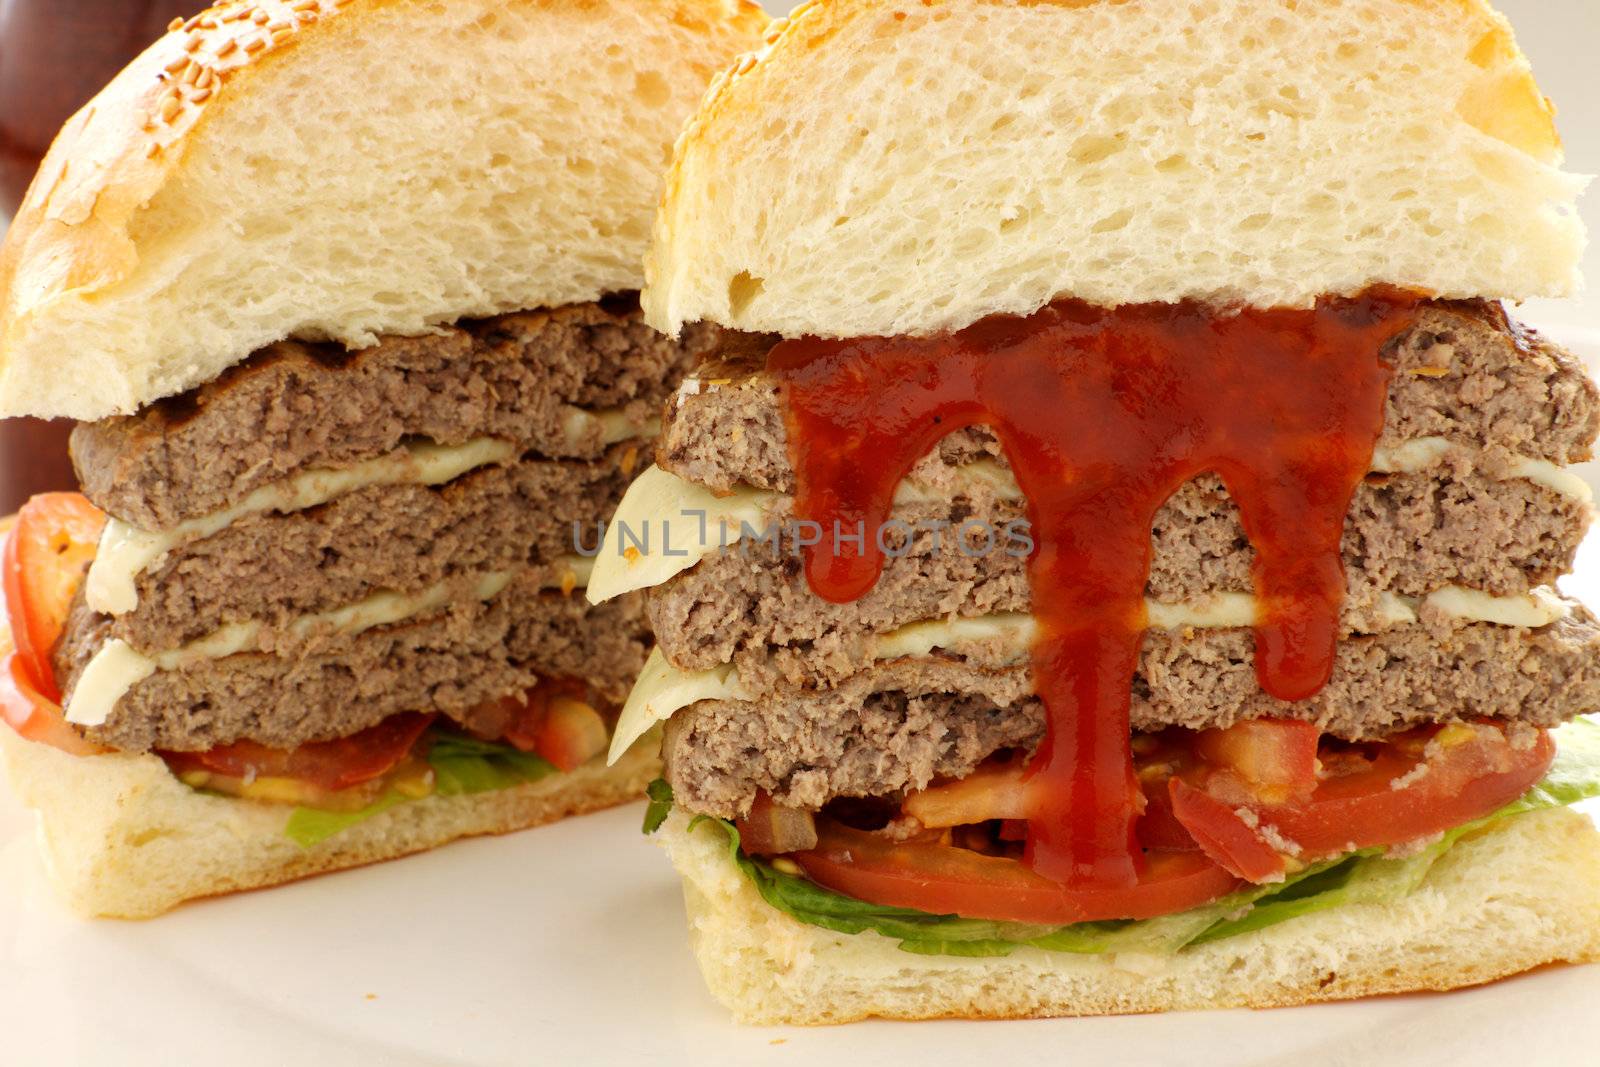 Sliced triple decker beef and cheese burger with ketchup ready to serve.